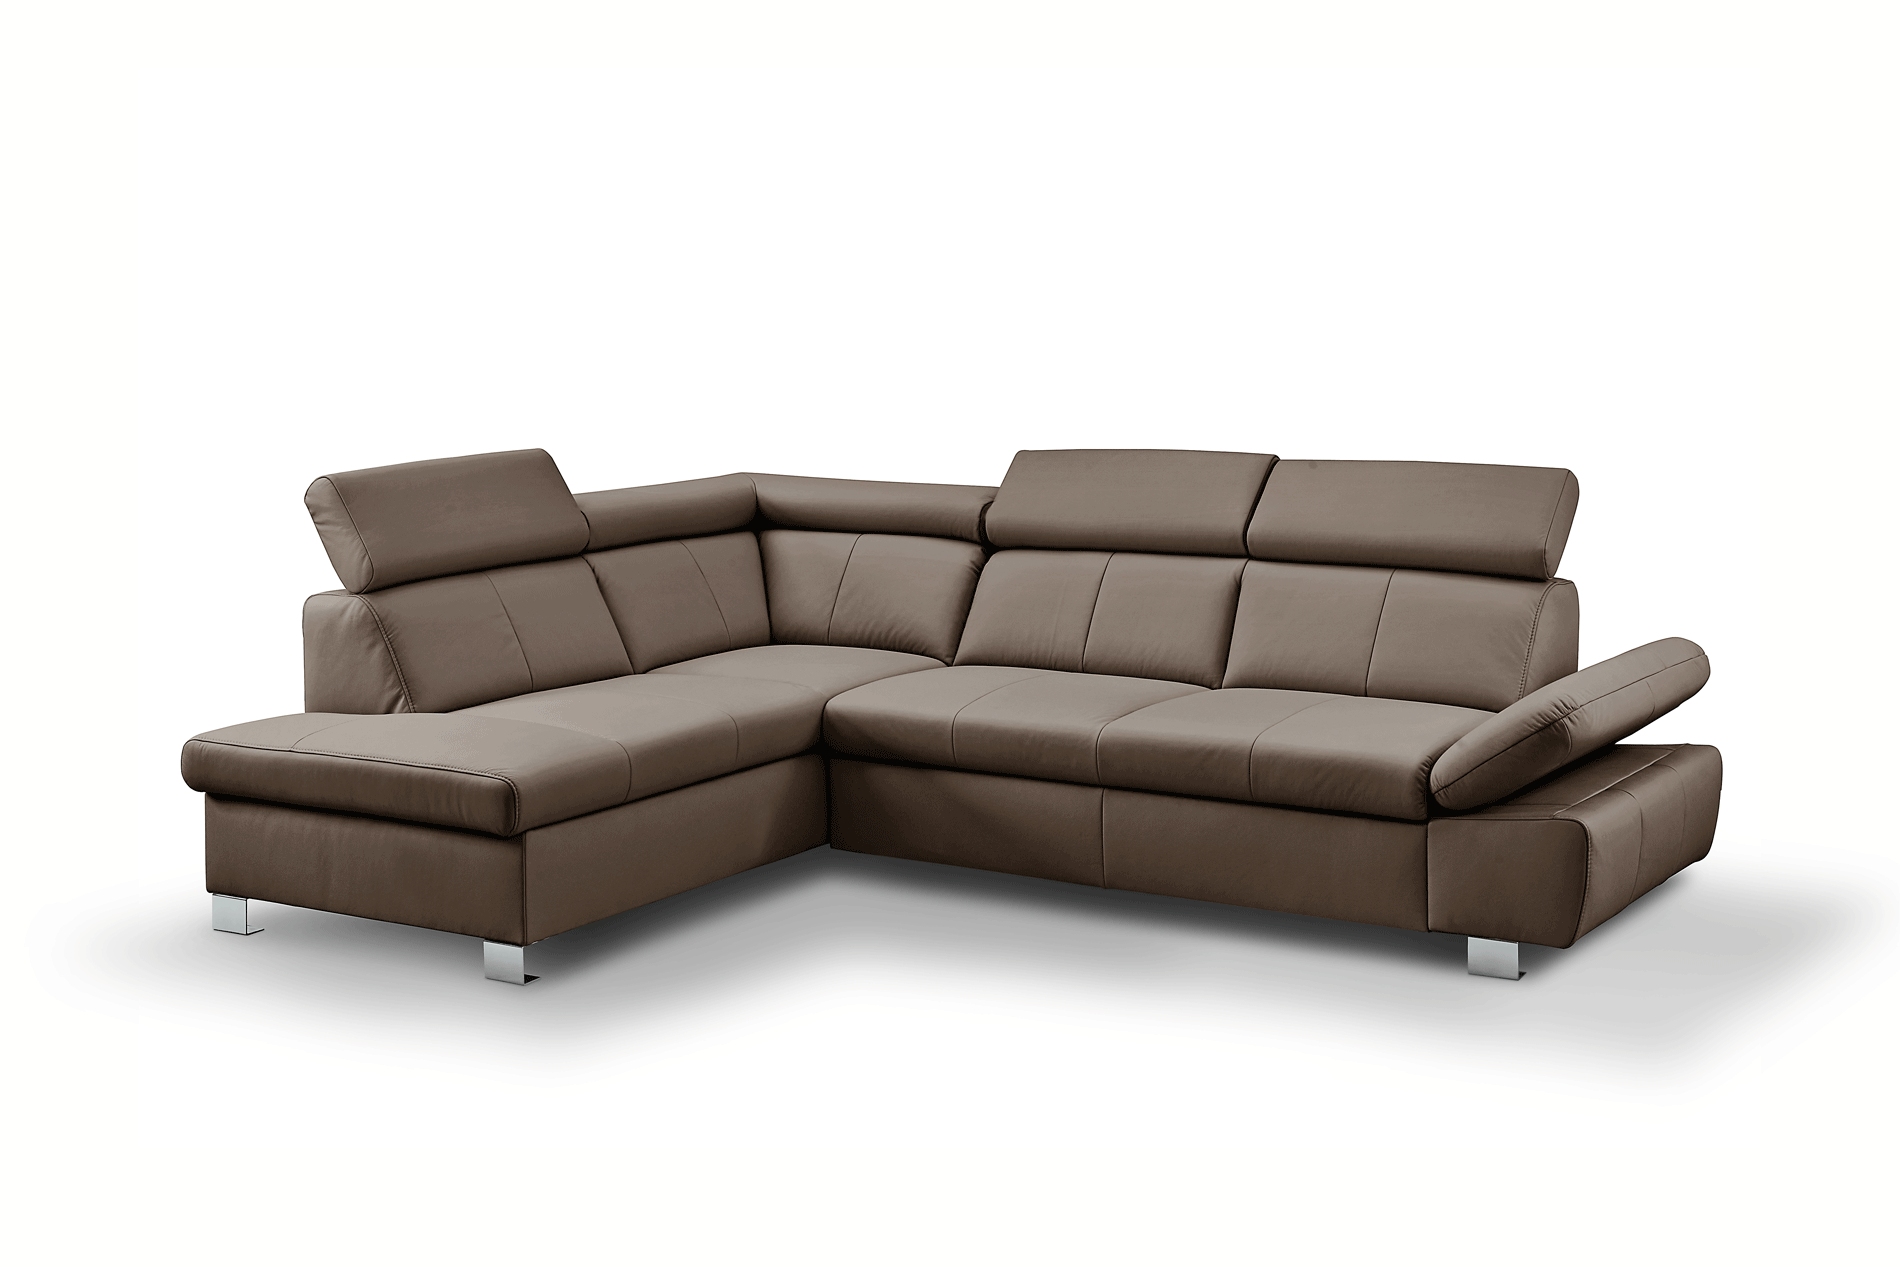 Living Room Furniture Reclining and Sliding Seats Sets Happy Sectional Leather